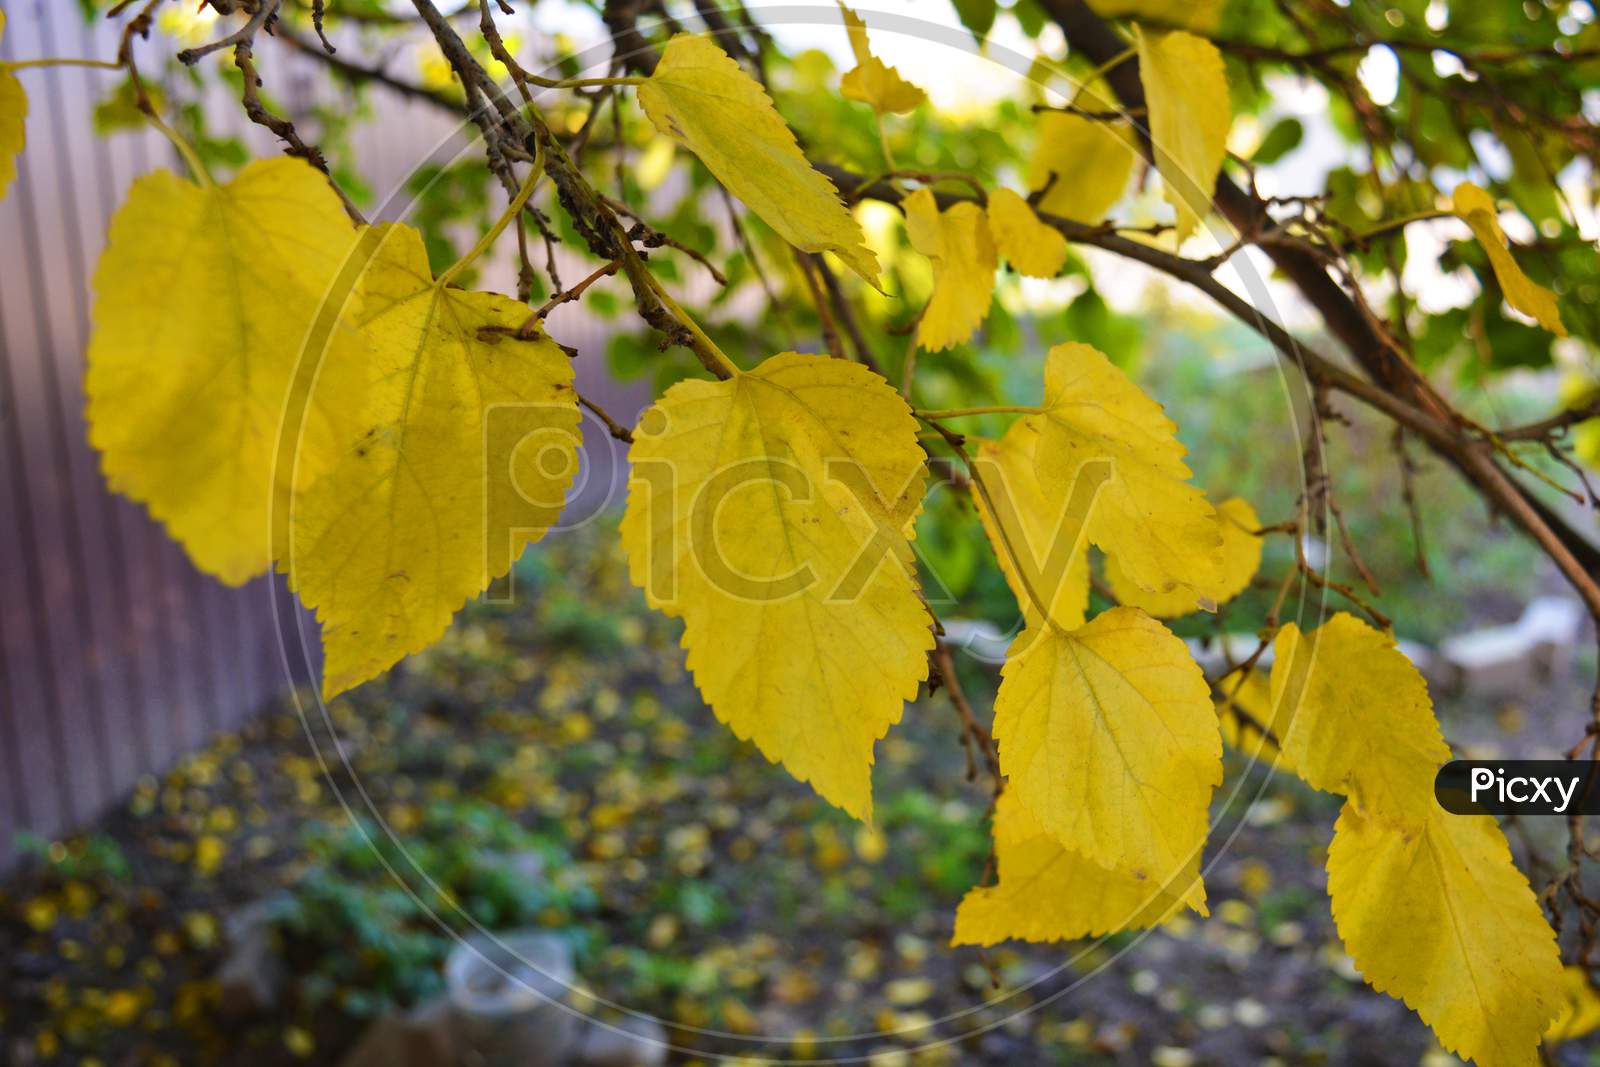 Bright yellow and green large autumn leaves of mulberry hanging on the branches of a large tree.